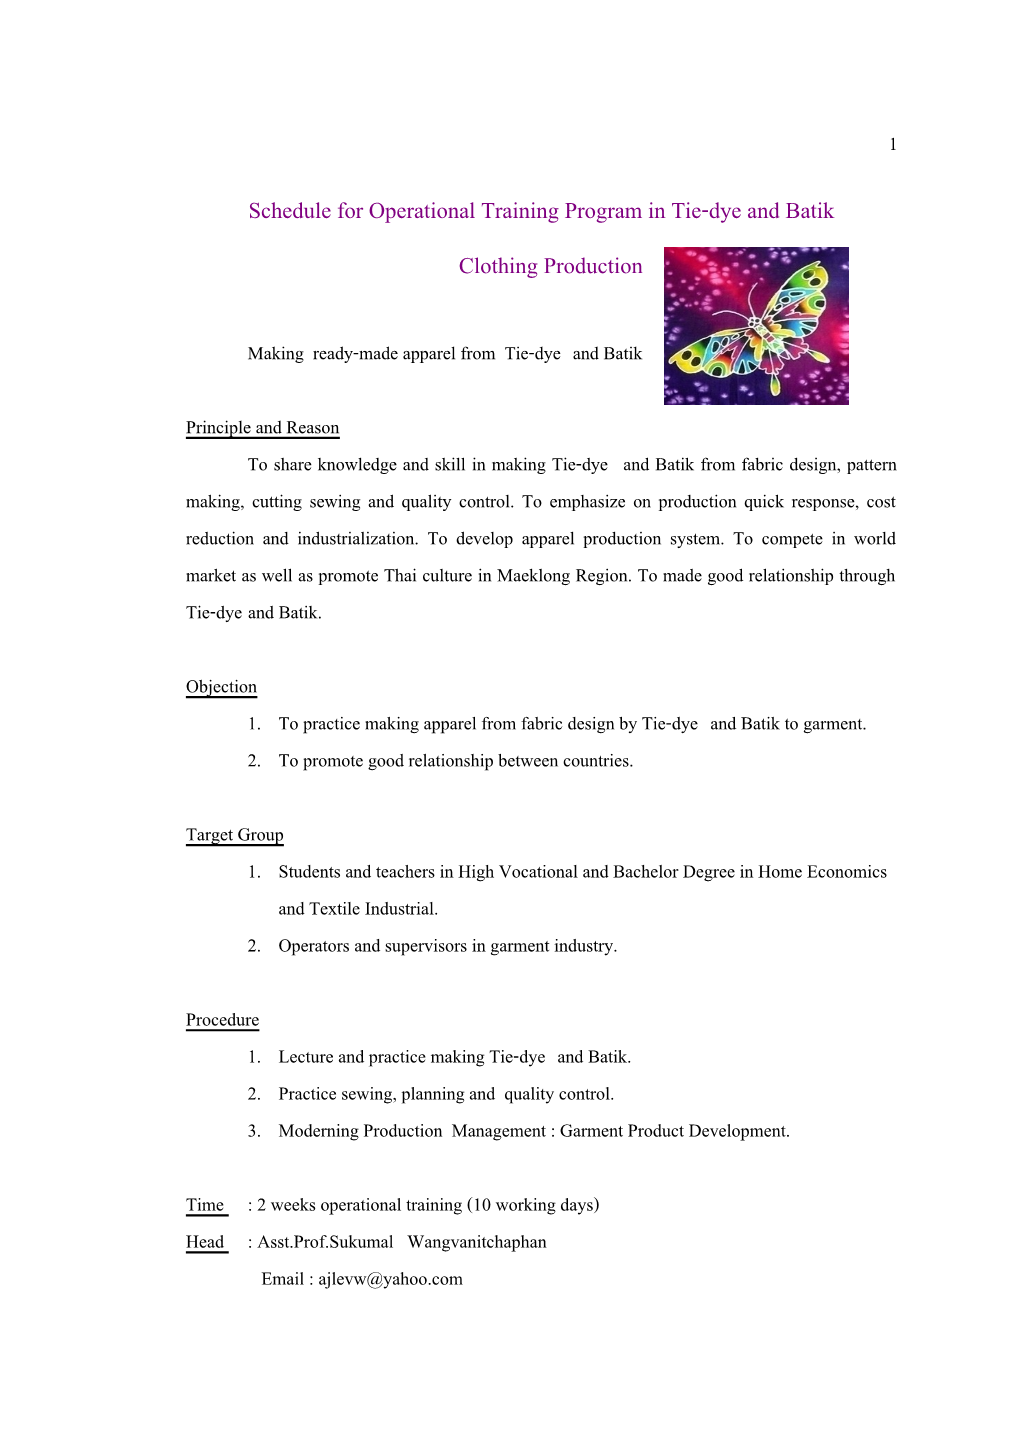 Schedule for Operational Training Program in Tie-Dye and Batik